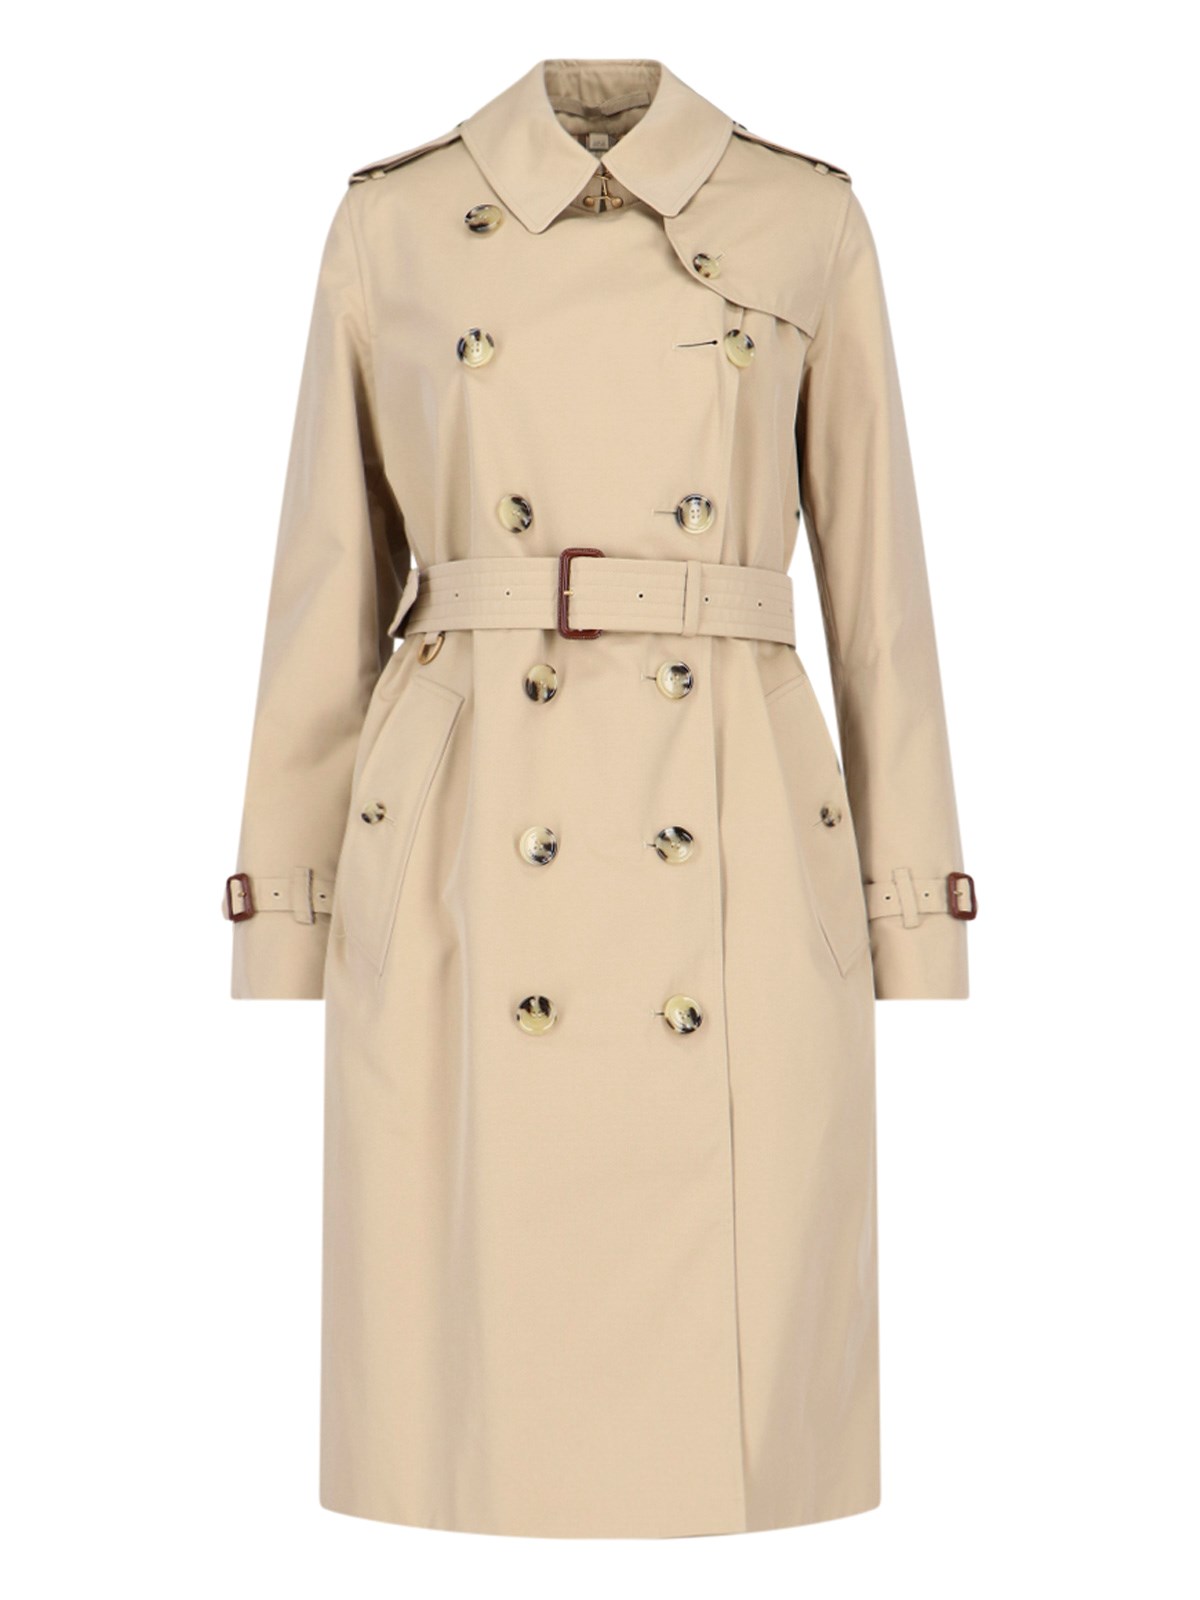 BURBERRY "THE CHELSEA" TRENCH COAT